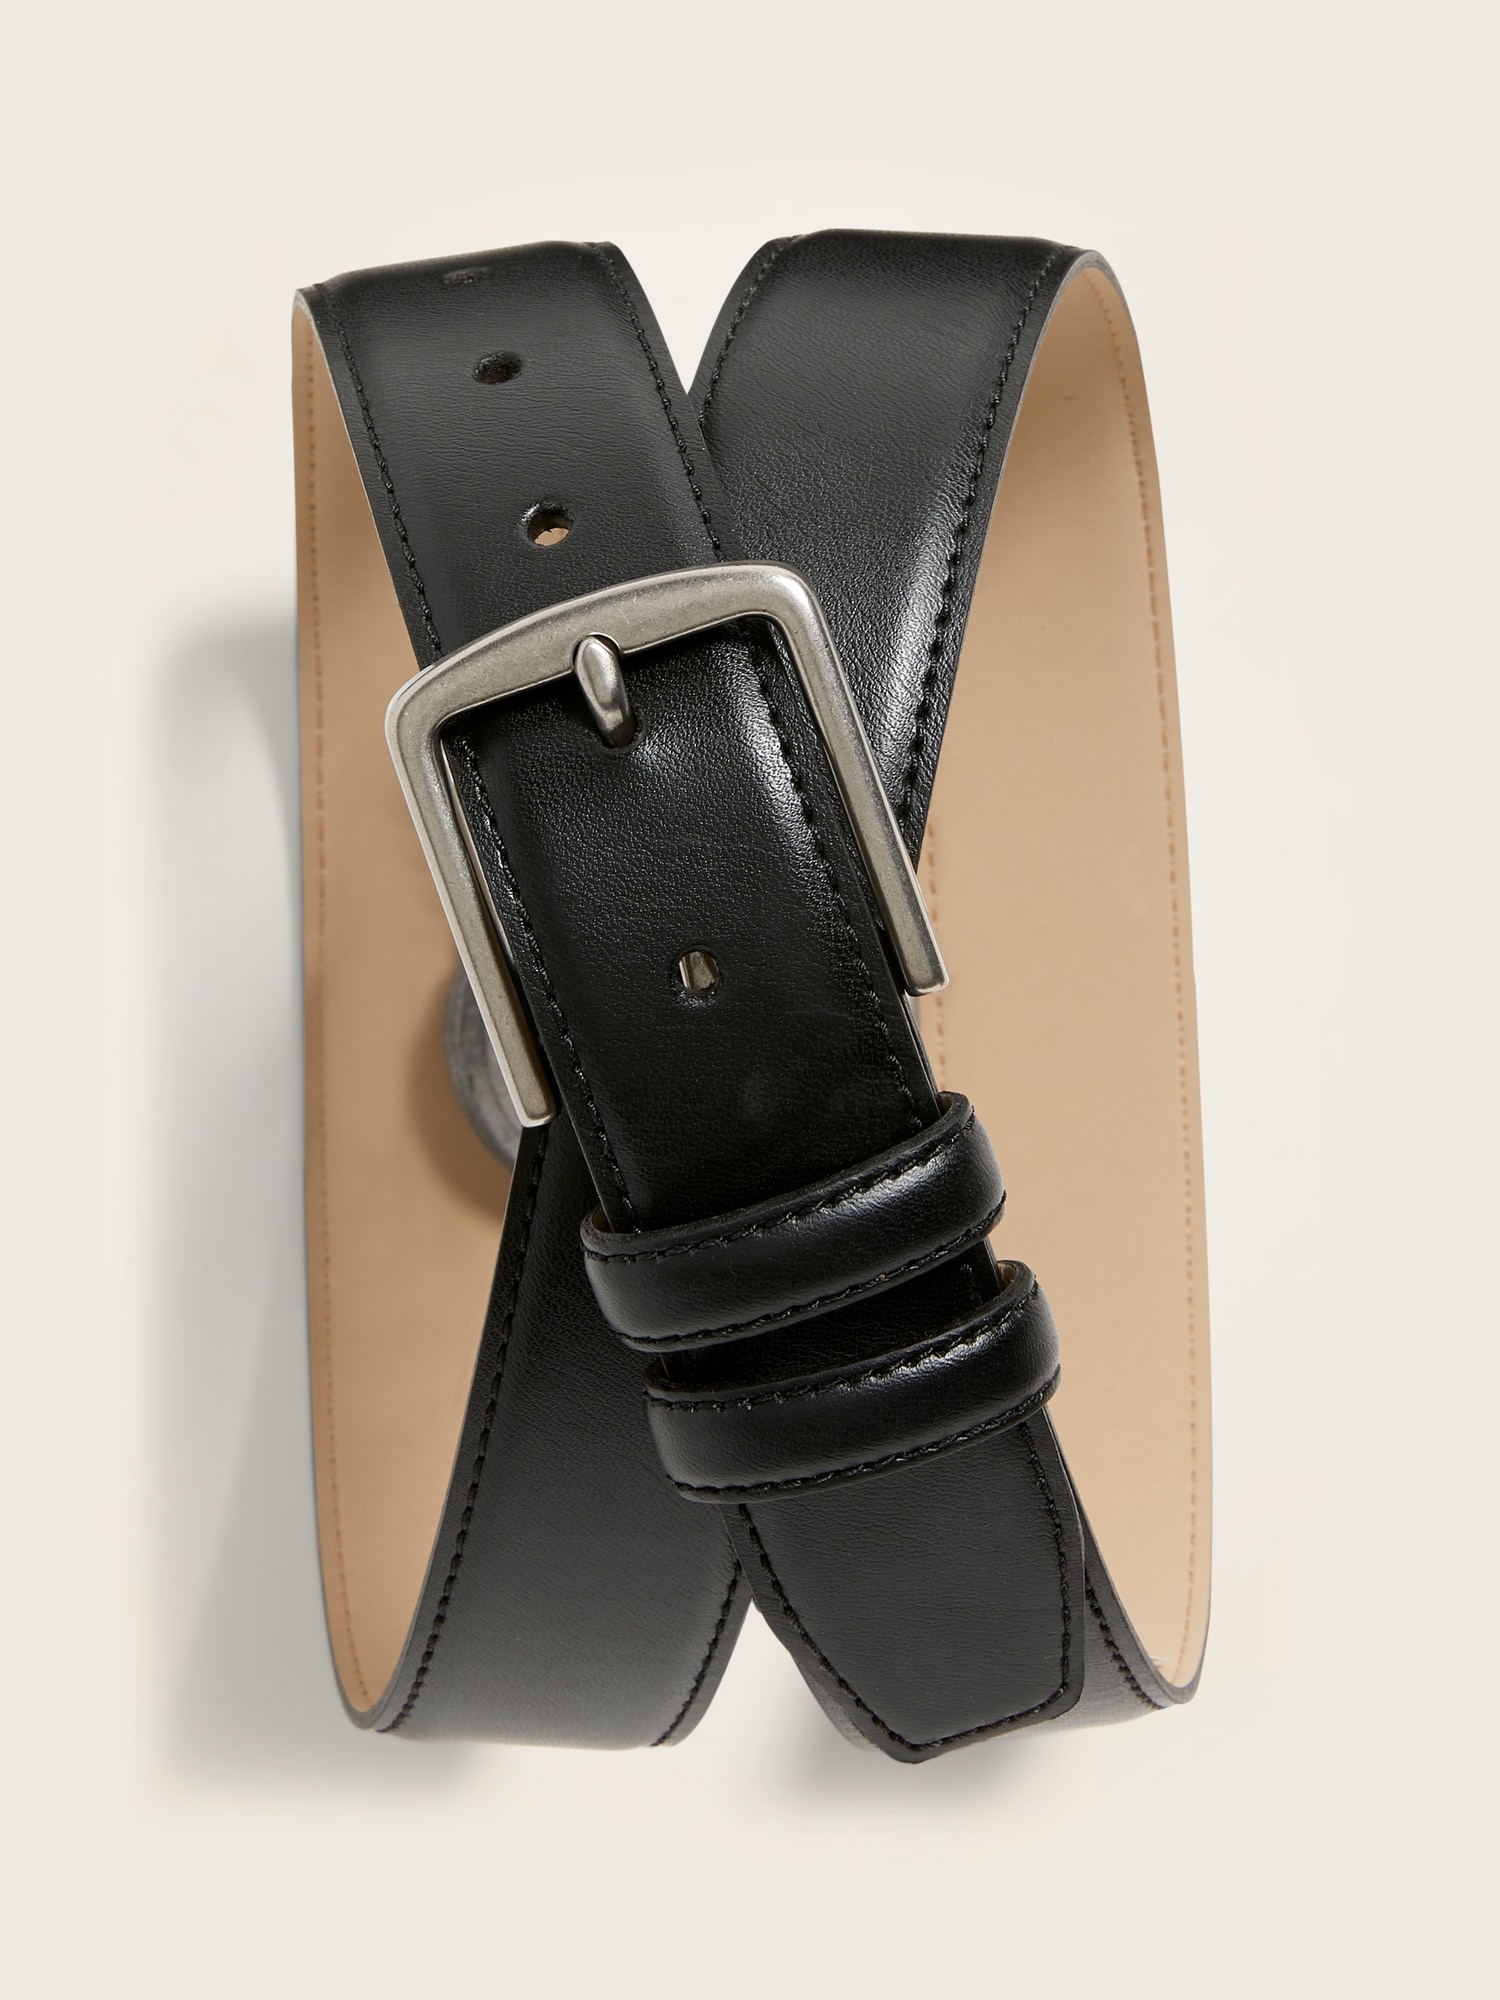 Old Navy - Adjustable Faux Textured-Leather Belt for Women (1.5-inch) black